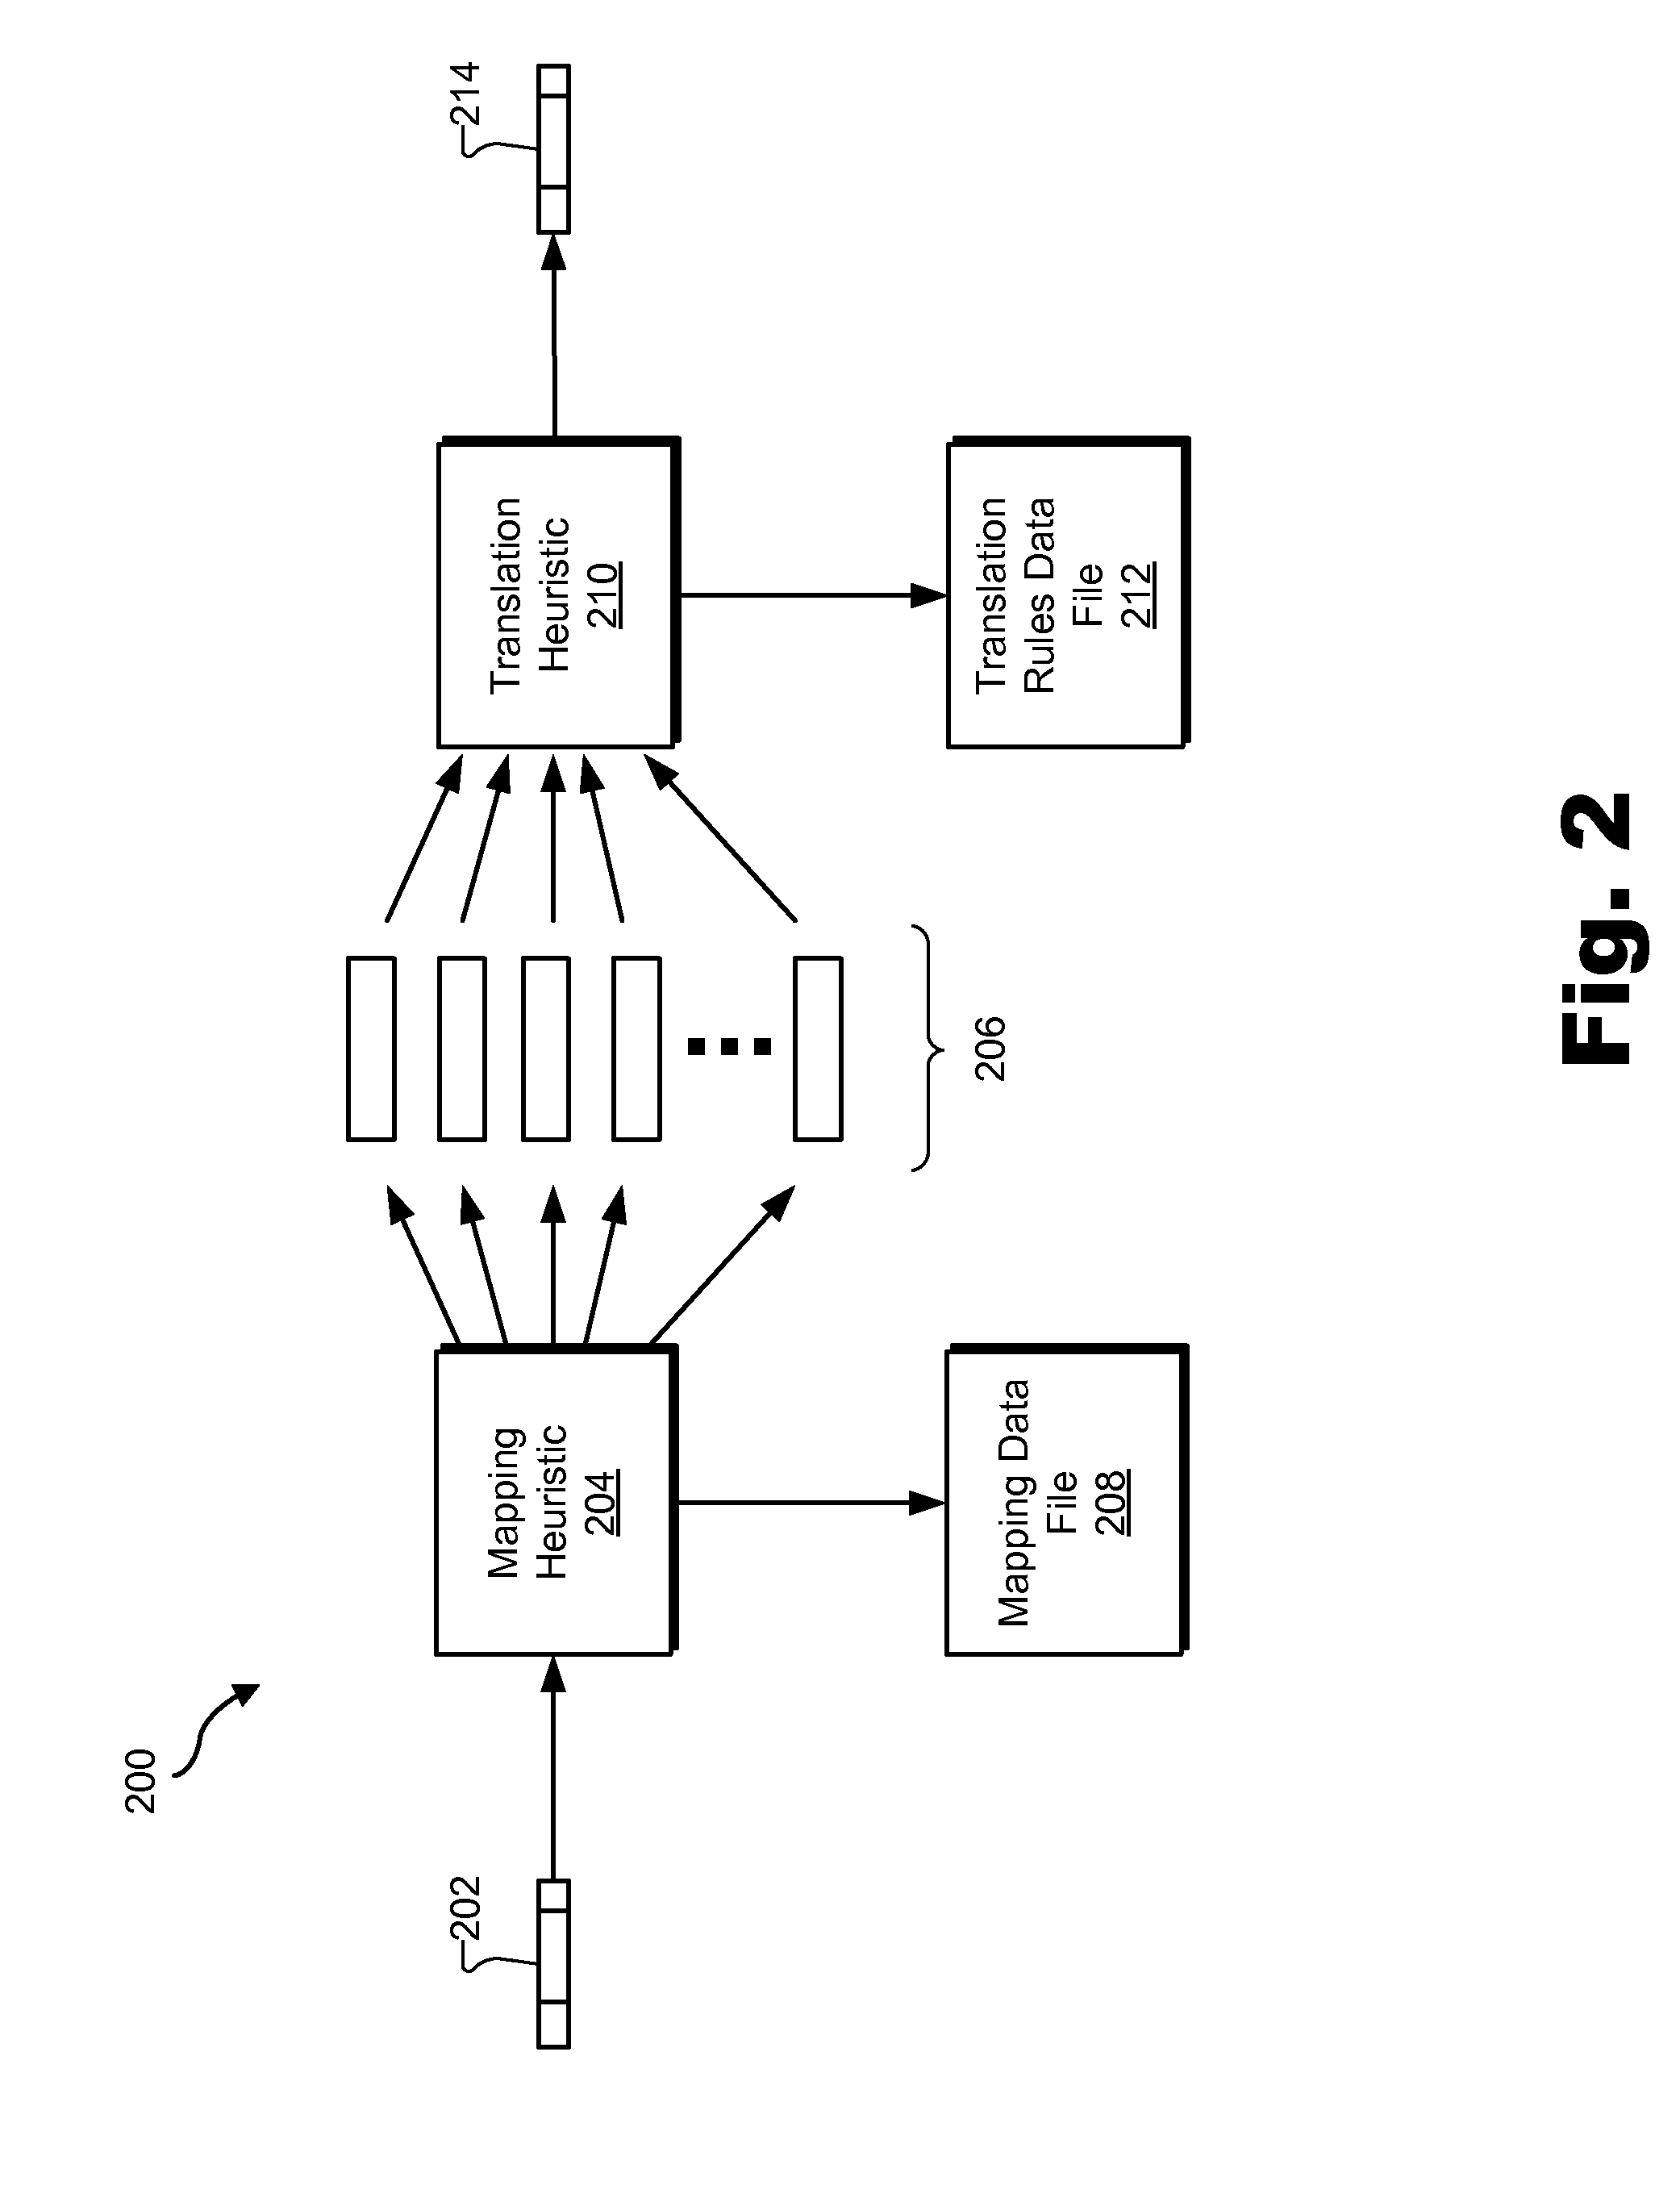 Network alarm message processing systems and methods